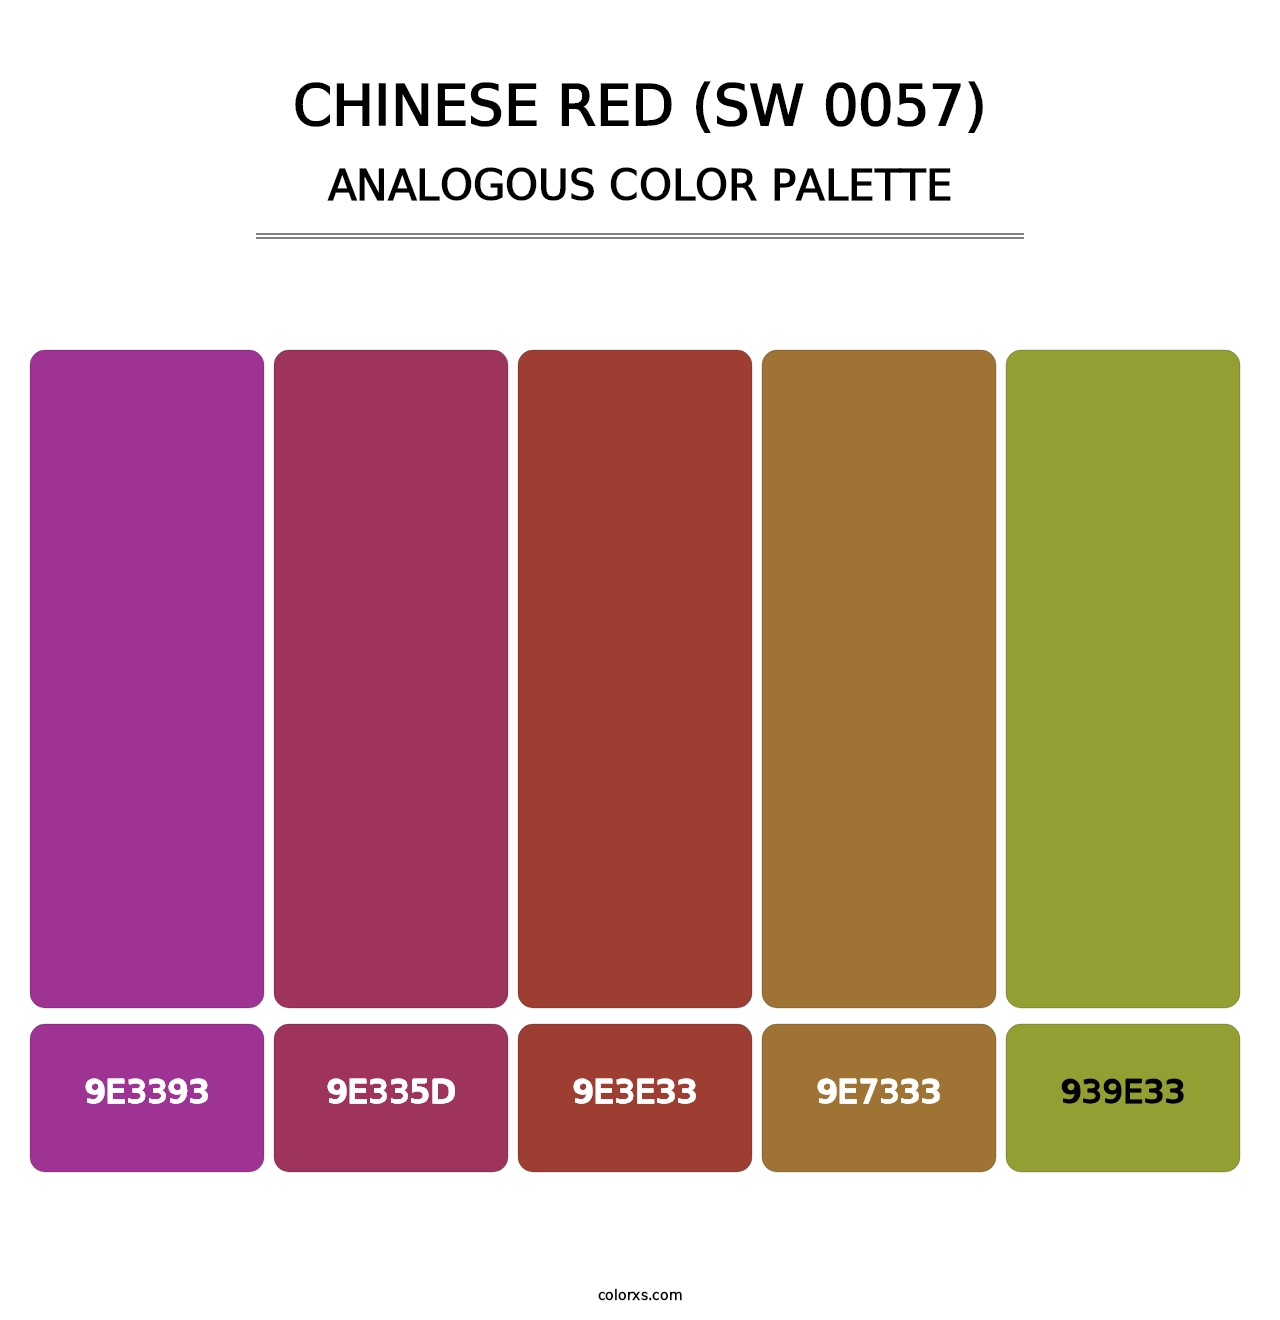 Chinese Red (SW 0057) - Analogous Color Palette